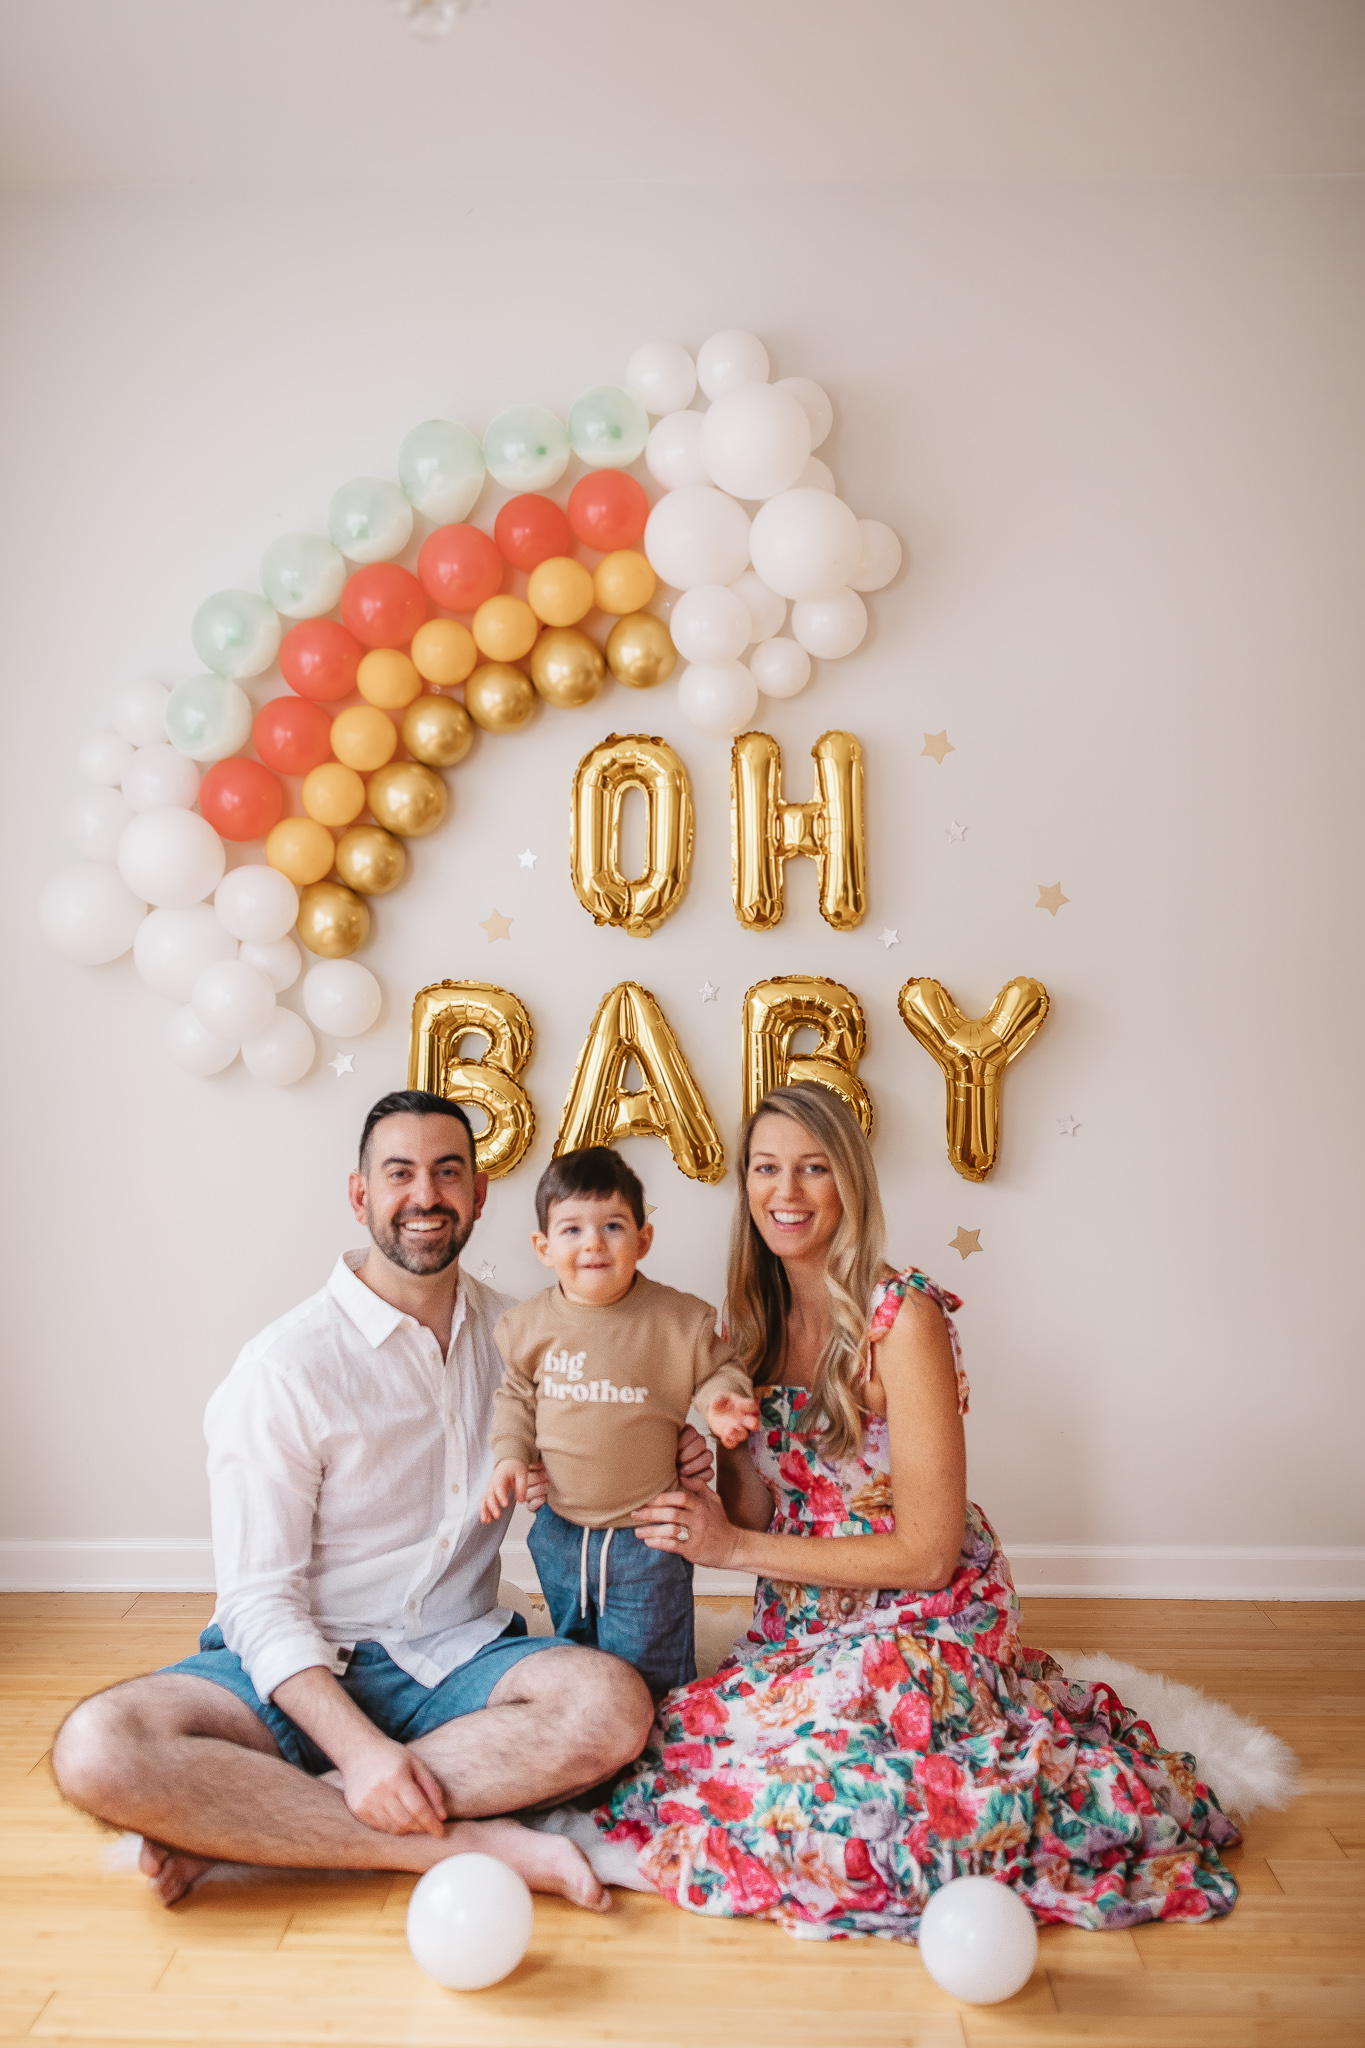 DIY Rainbow Baby Pregnancy Announcement. Family photos in front of rainbow baby balloon backdrop.